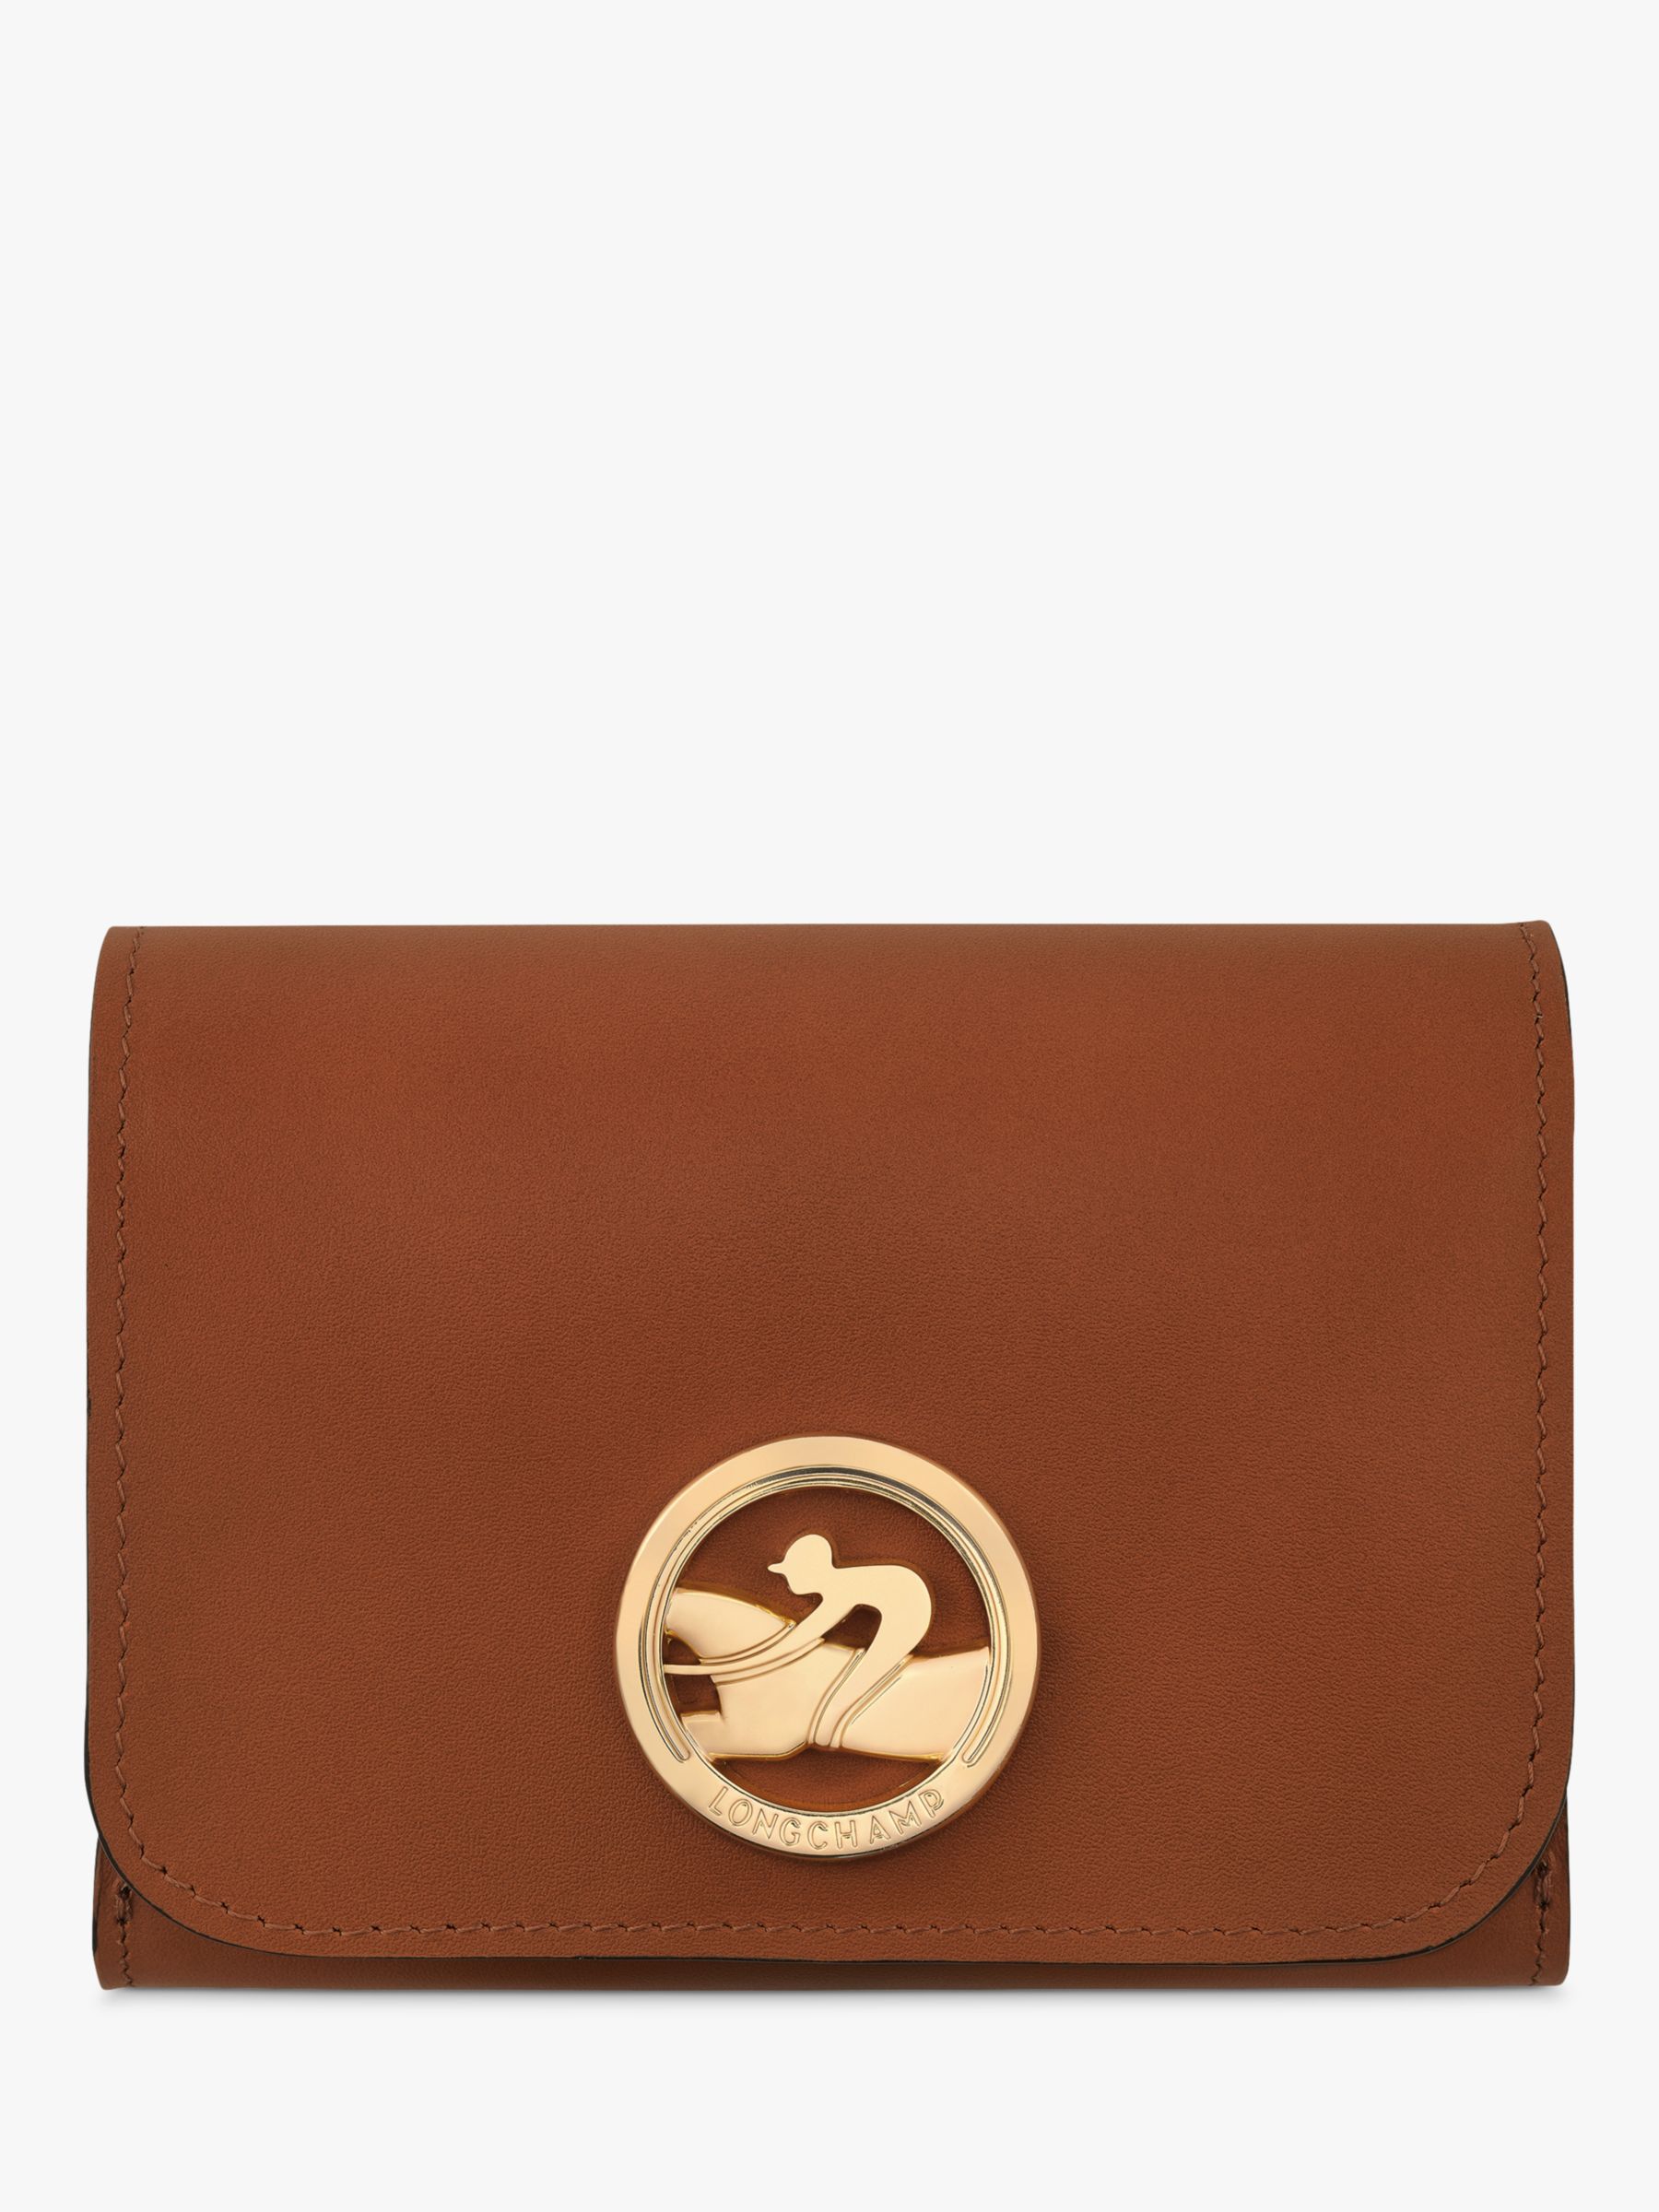 Buy Longchamp Box-Trot Compact Leather Wallet Online at johnlewis.com